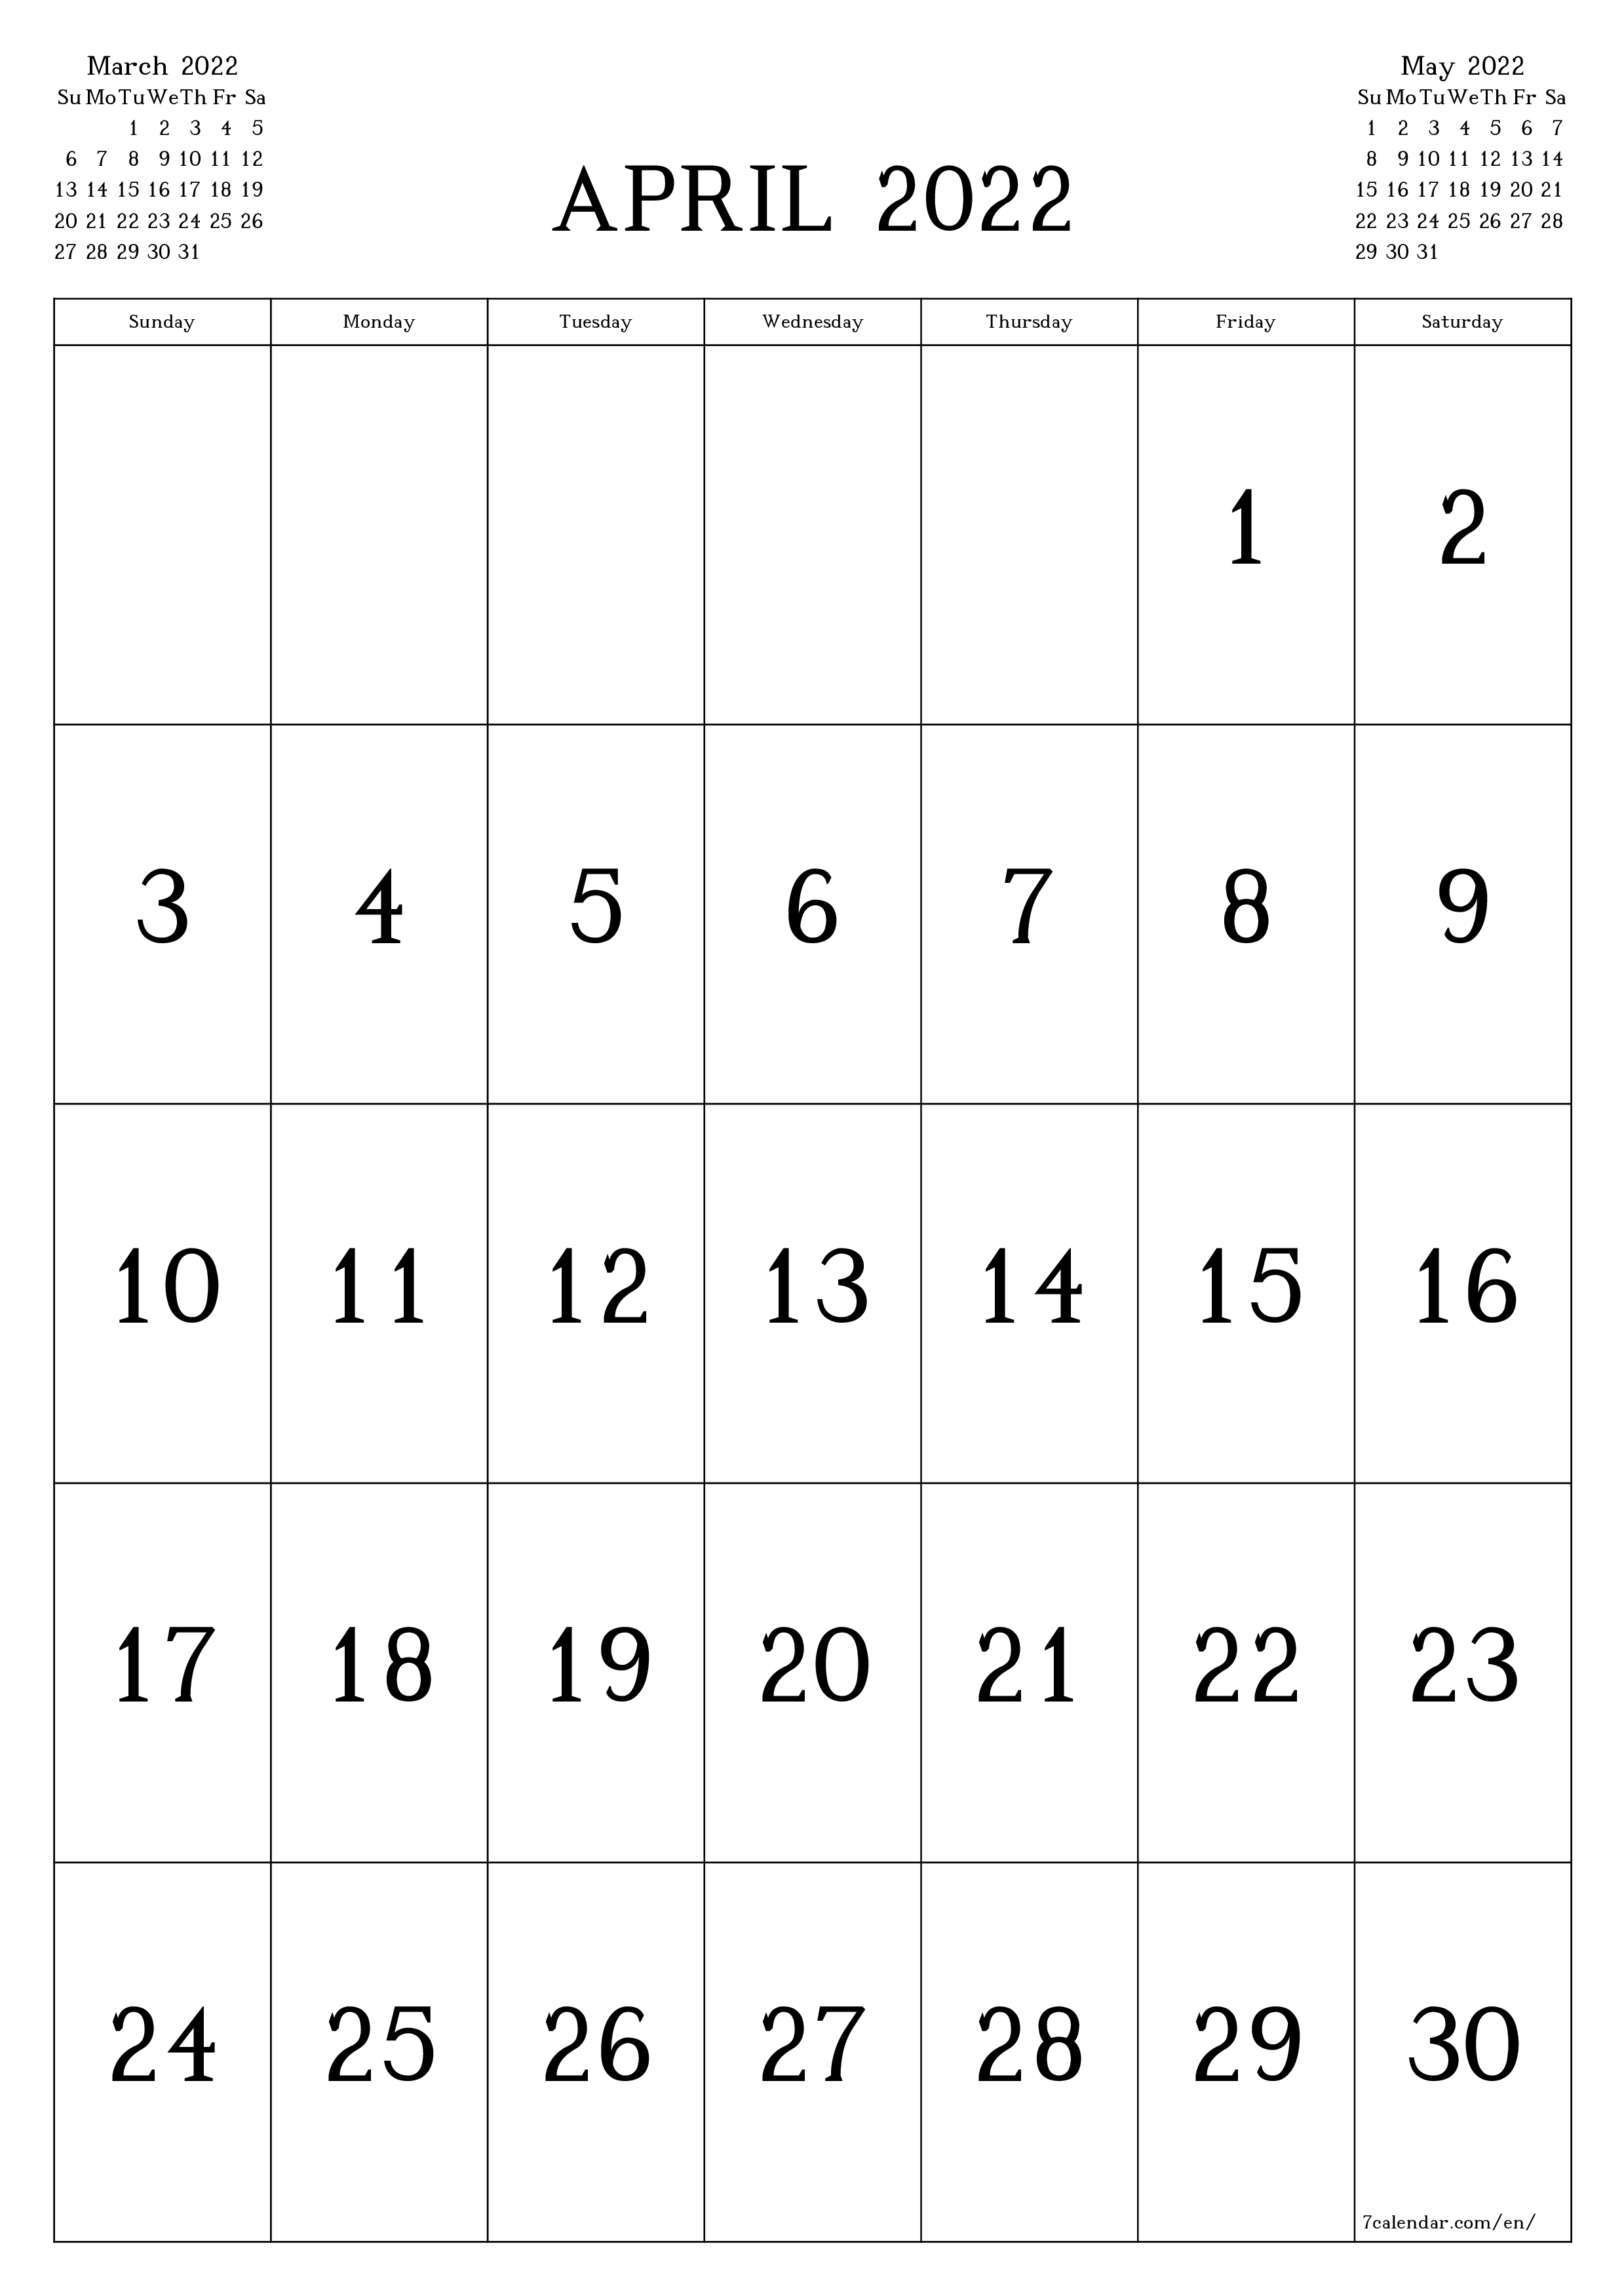 Blank monthly dated HD template image of calendar for month April 2022 save and print to PDF PNG English - 7calendar.com